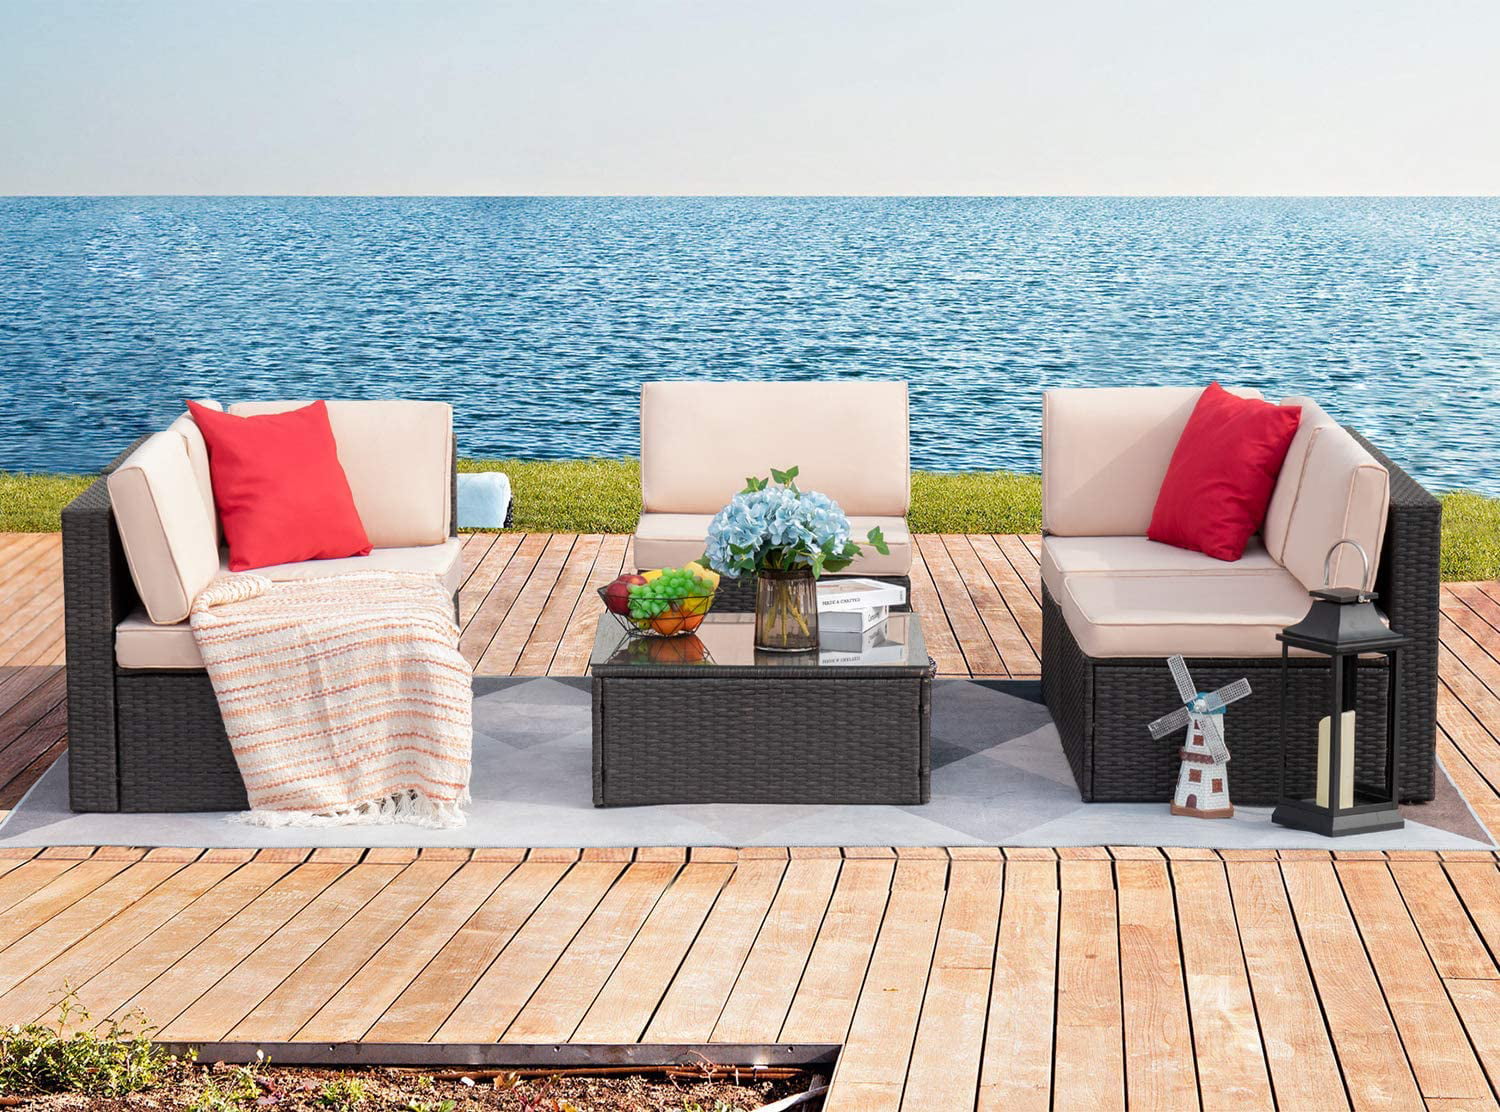 Red Devoko Patio Furniture Sets 6 Pieces Outdoor Sectional Rattan Sofa Manual Weaving Wicker Patio Conversation Set with Glass Table and Cushion